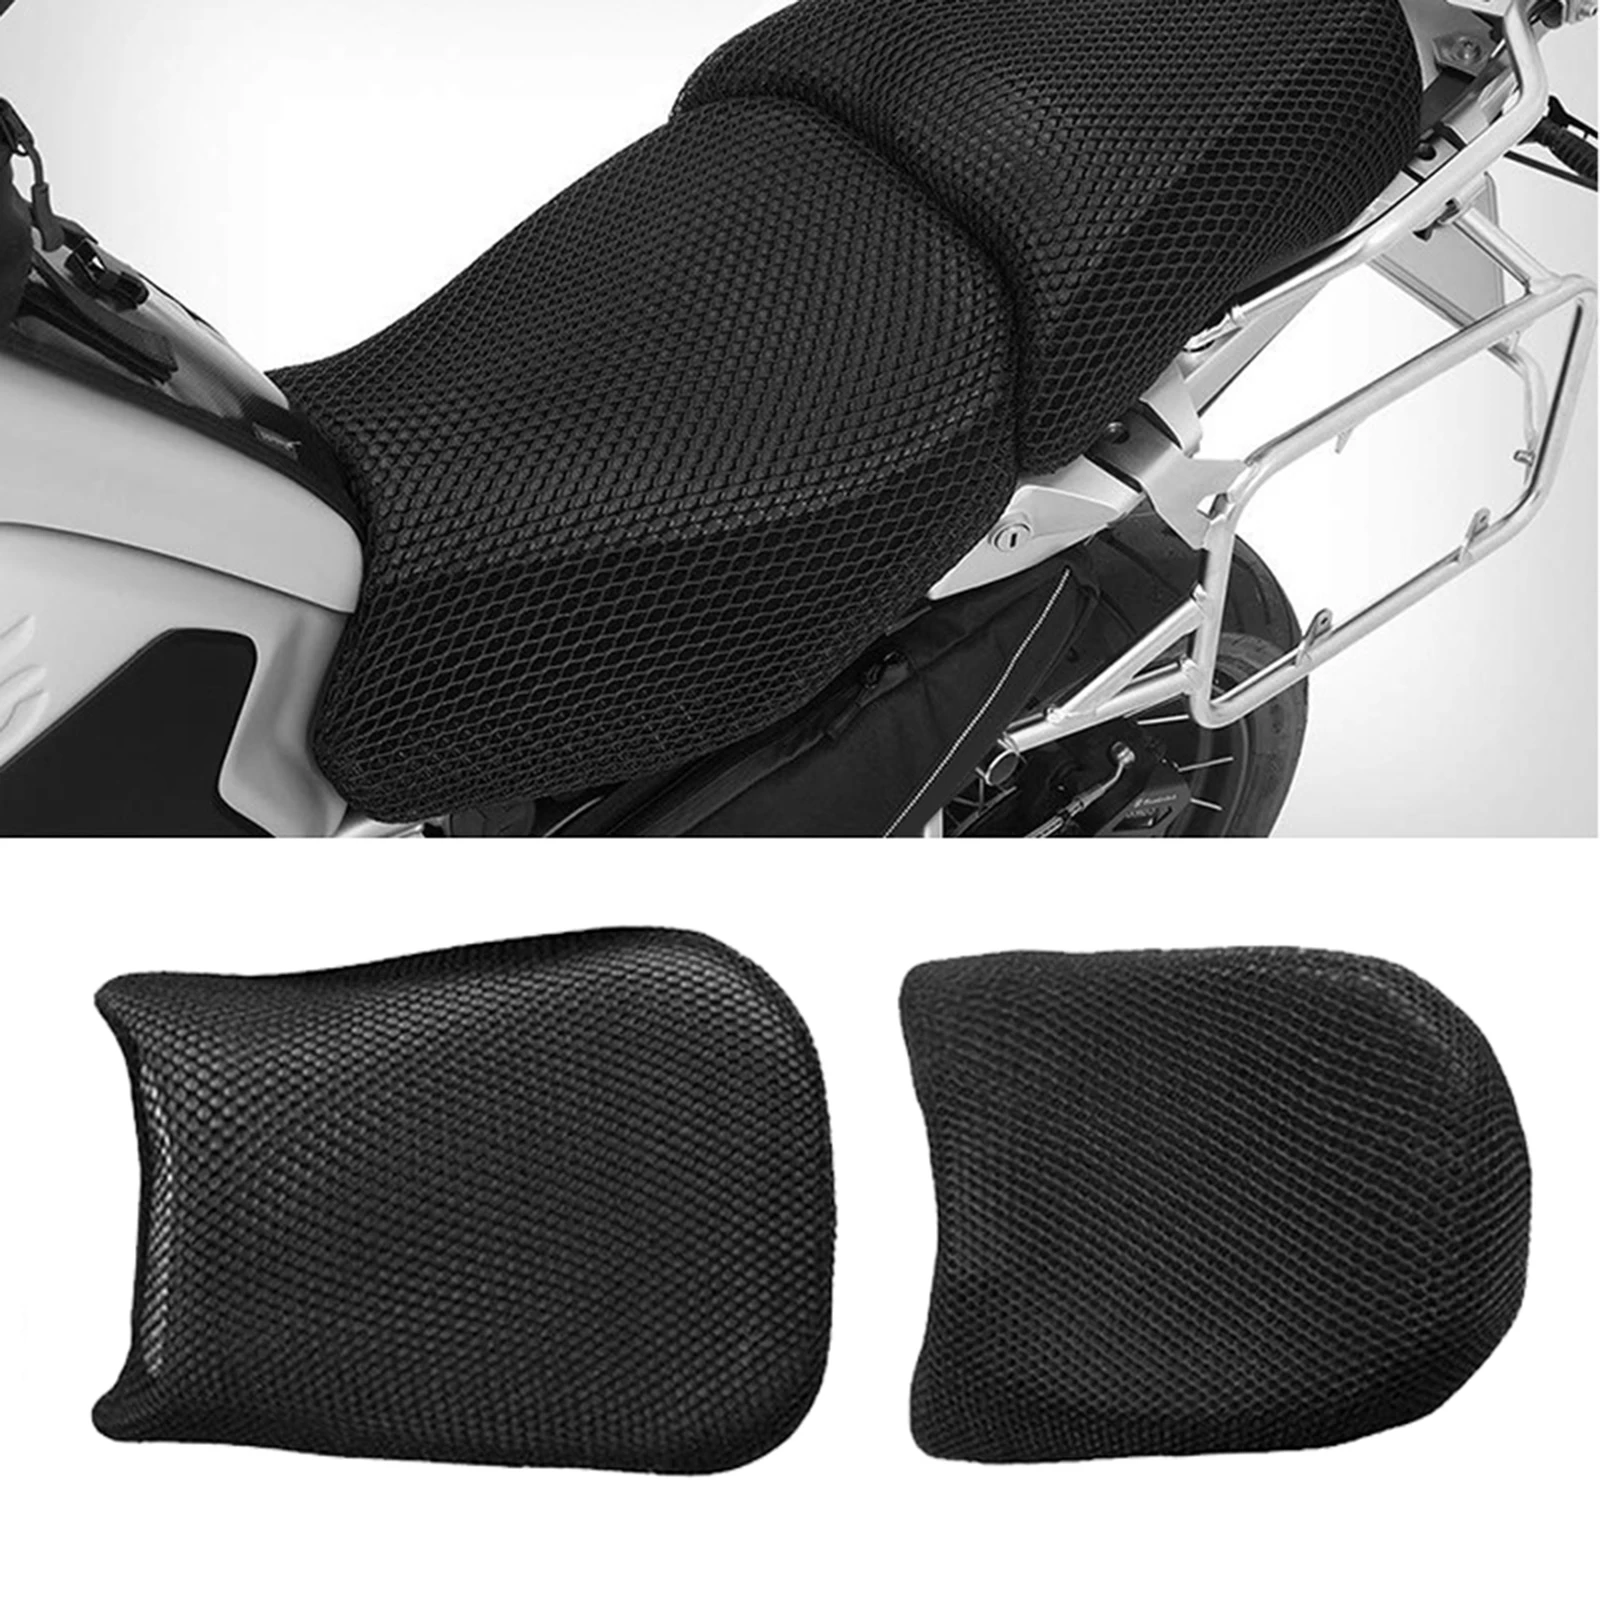 Motorbike Sport Motorcycle 3D Comfort Seat Cover For  R1200GS R 1200 GS